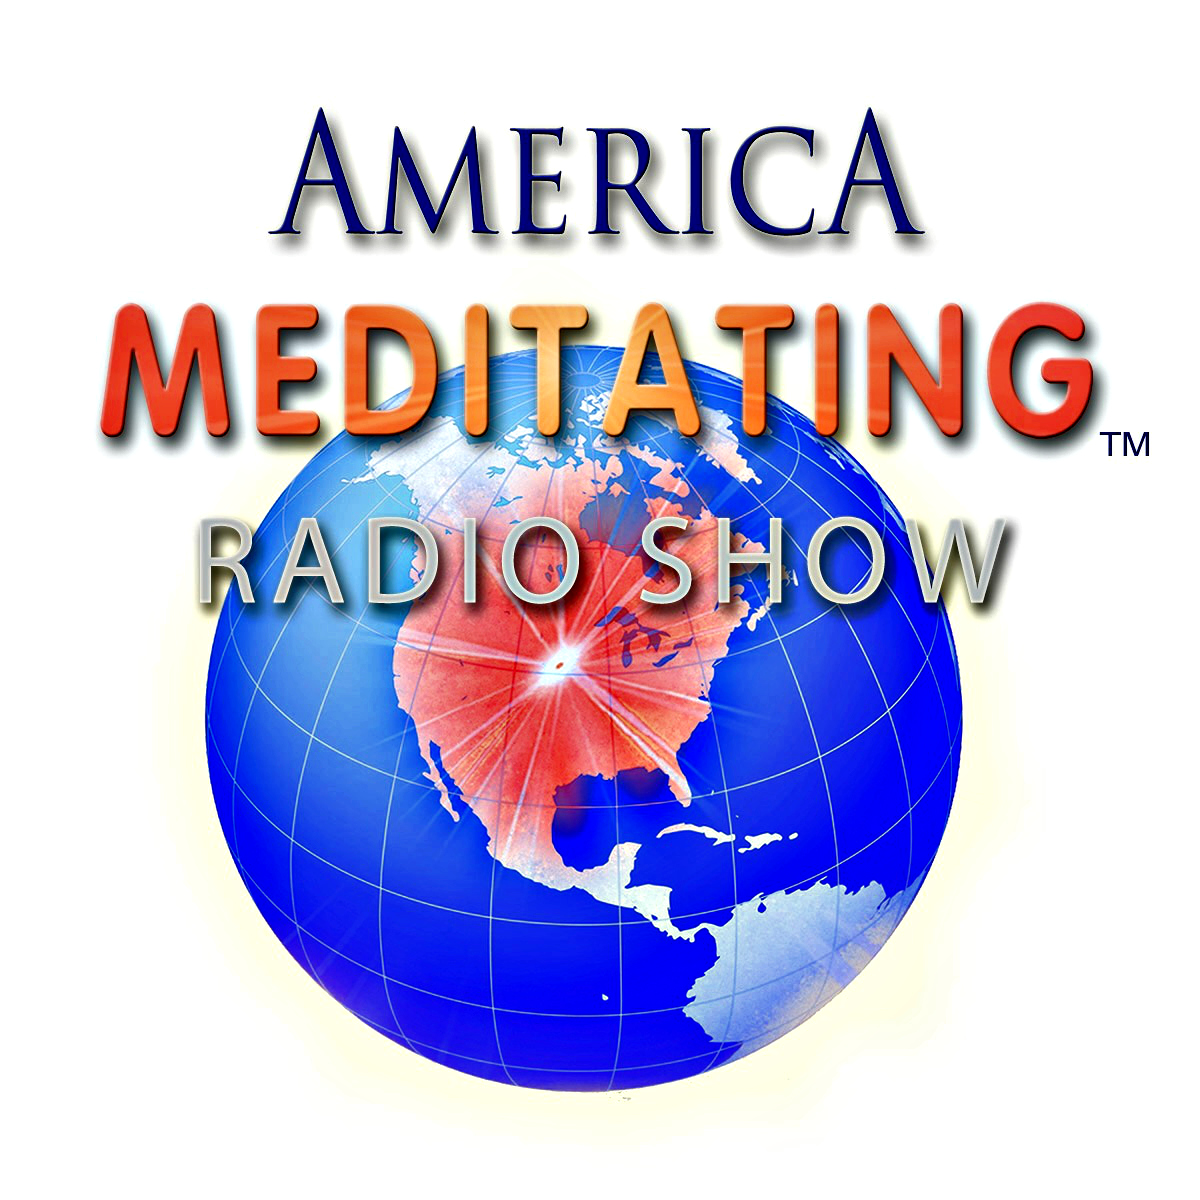 The America Meditating Radio Show, hosted by Sister Jenna provides listeners with inspiring ways to combat challenges that we encounter along the journey of life.
